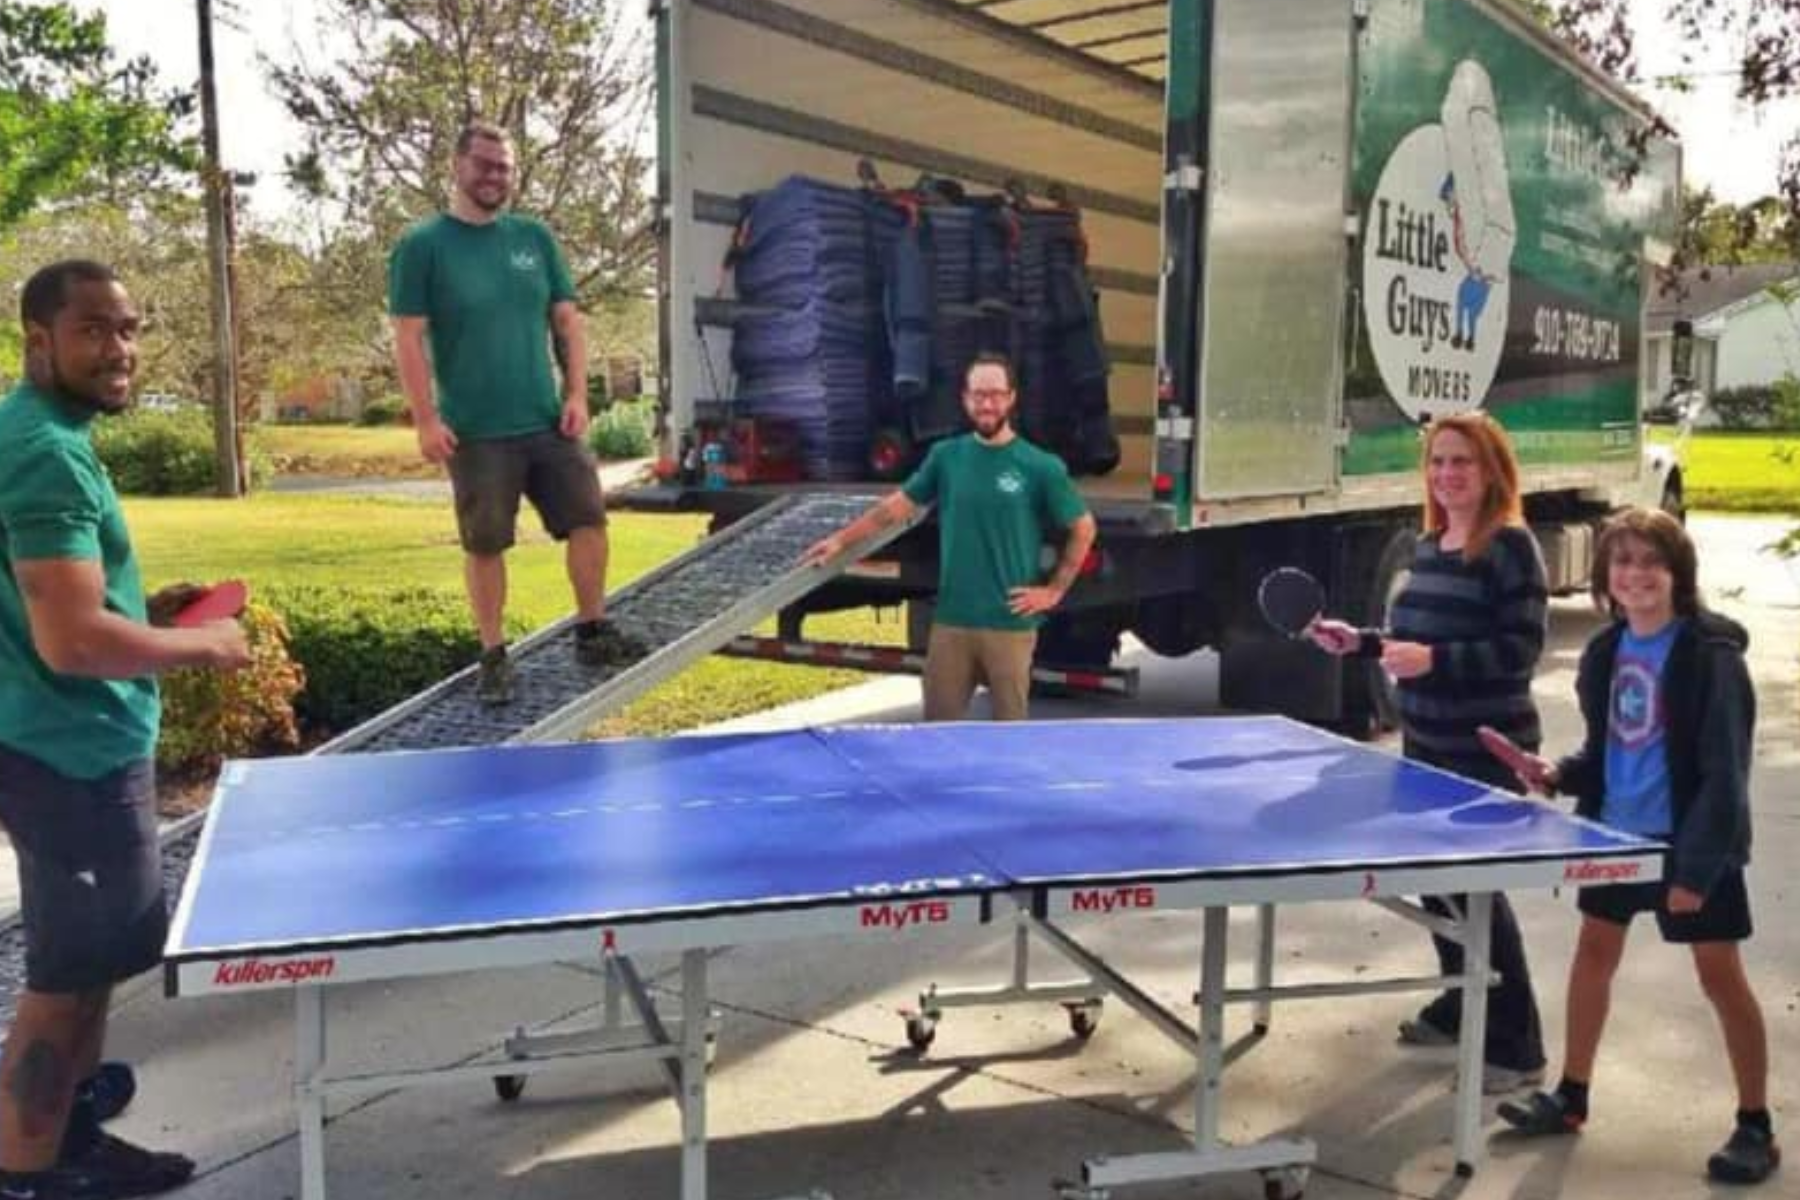 A group of workers from a truck service company are loading a ping pong table onto a truck